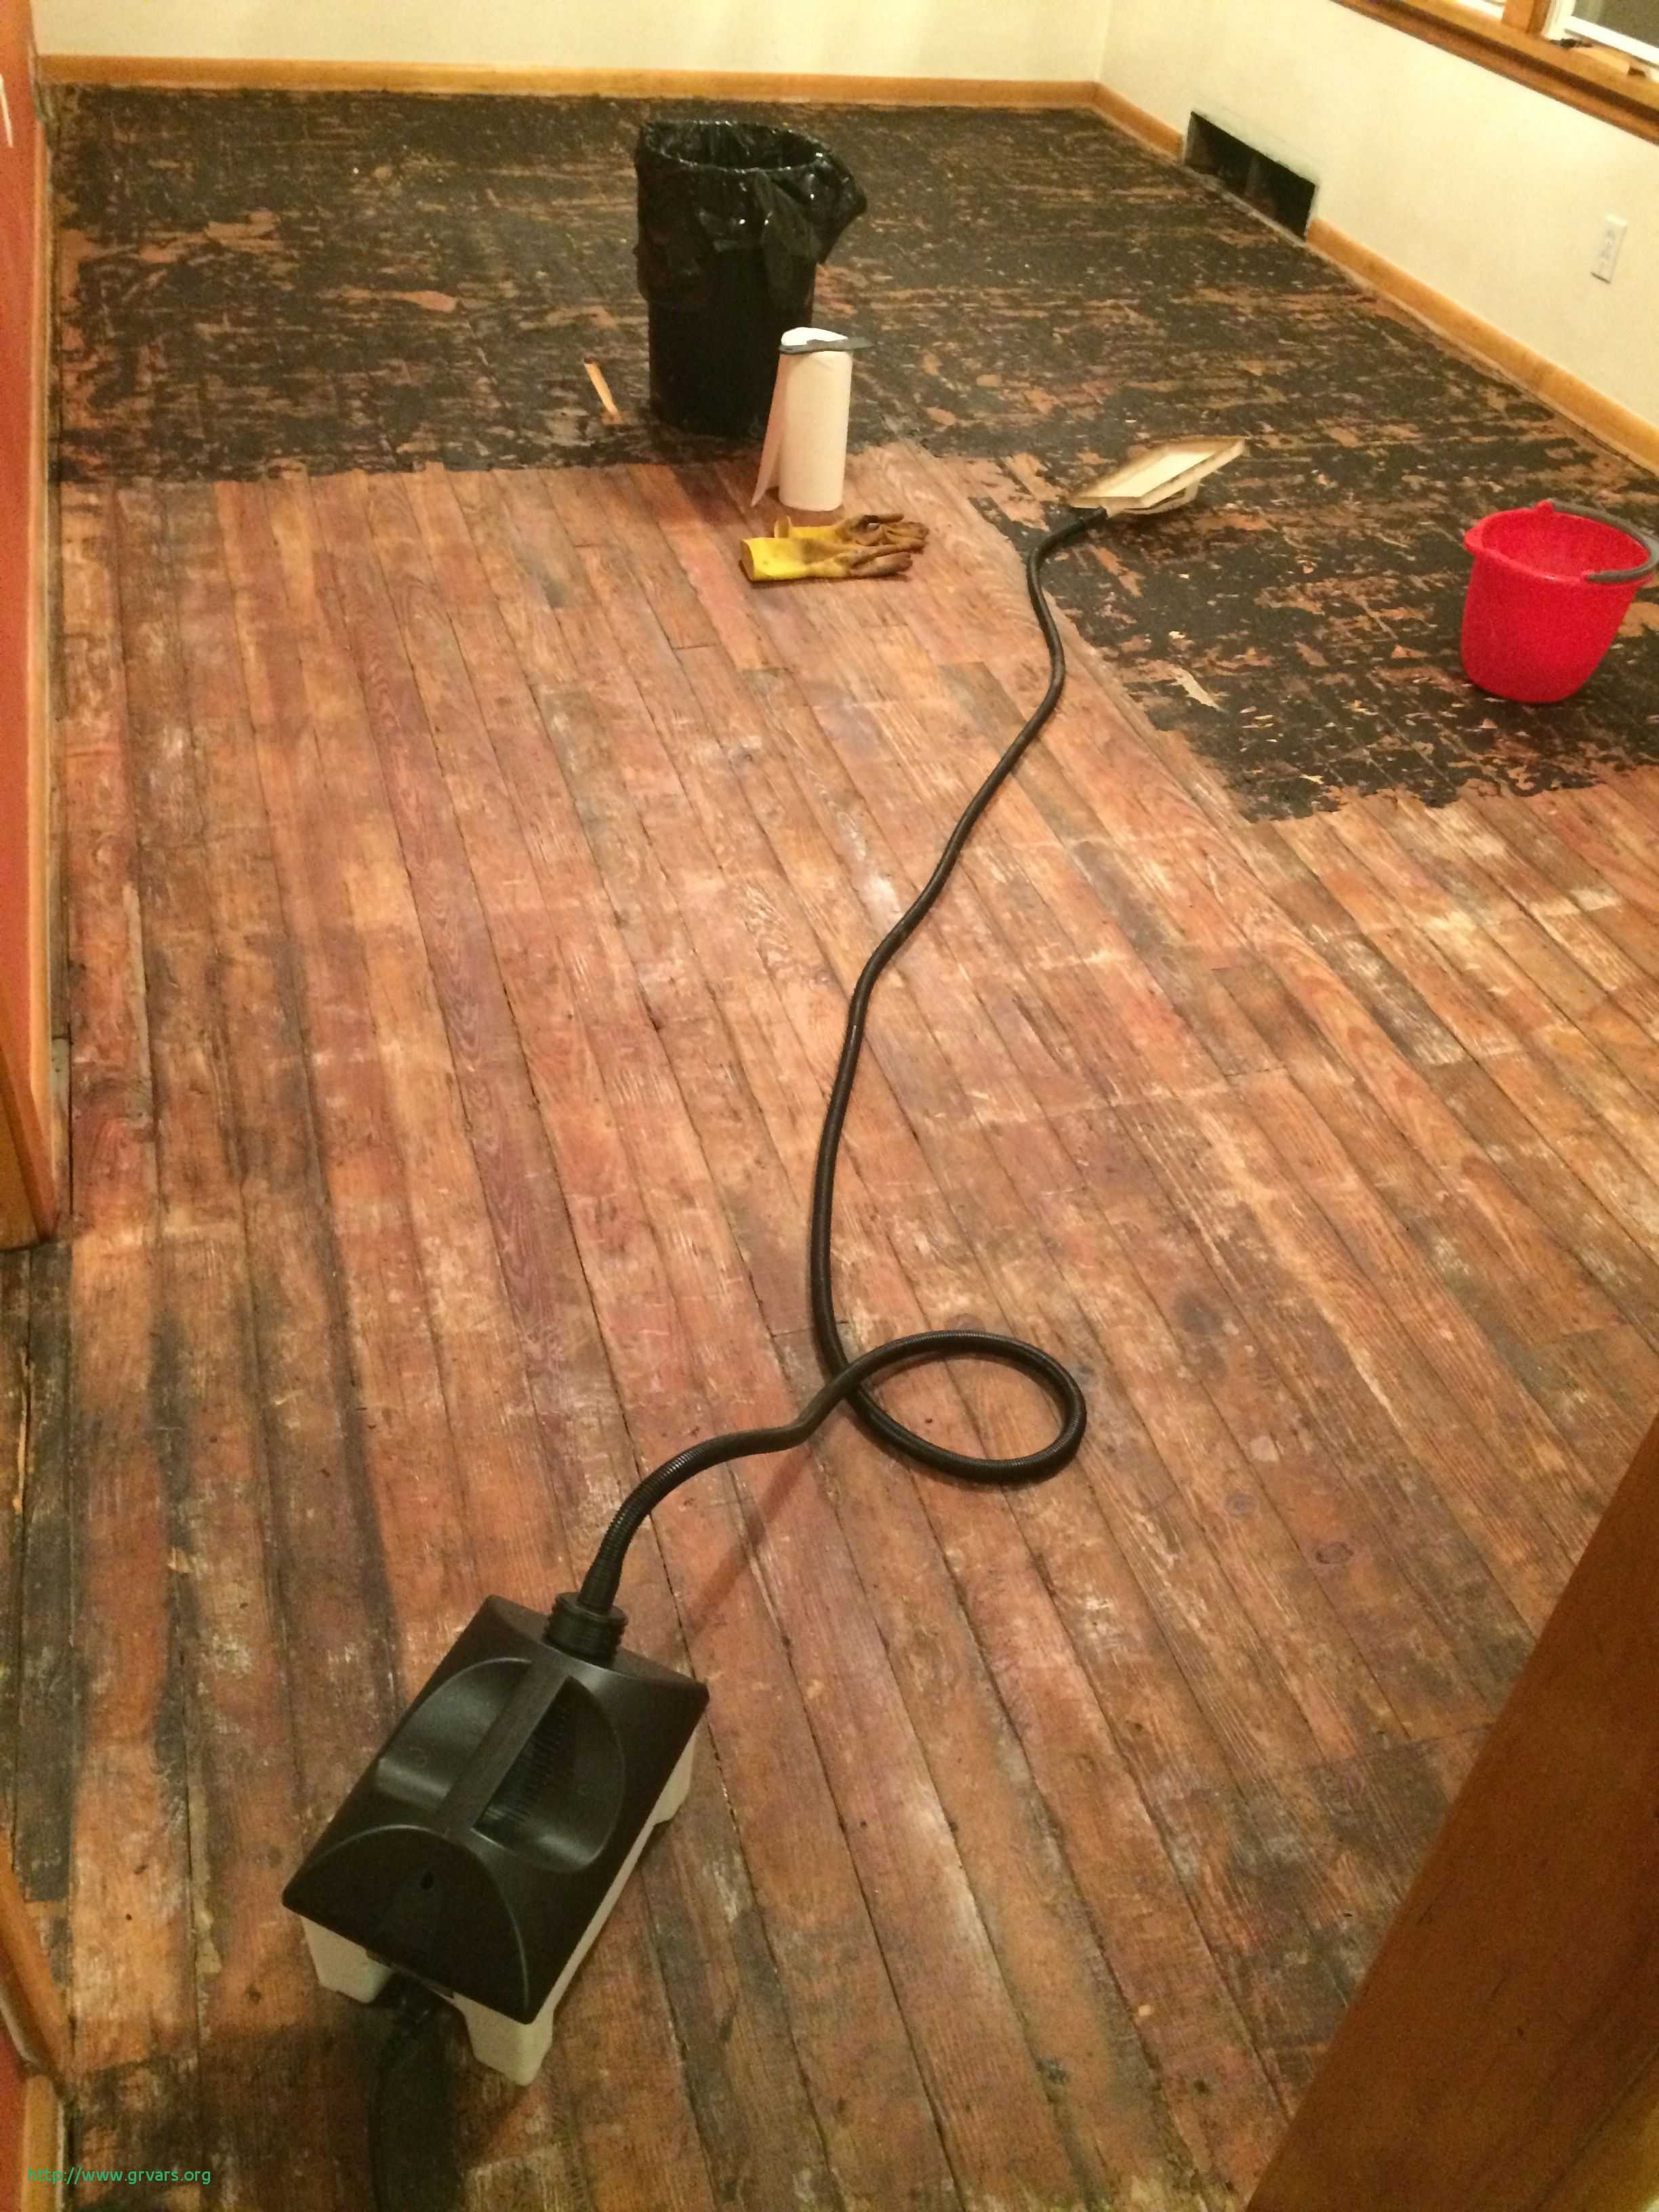 hardwood floors floating vs glue down of 20 charmant how to remove old glue from wood floor ideas blog for removing glue from hardwood floors luxury removing old tar paper and glue from hardwood found under